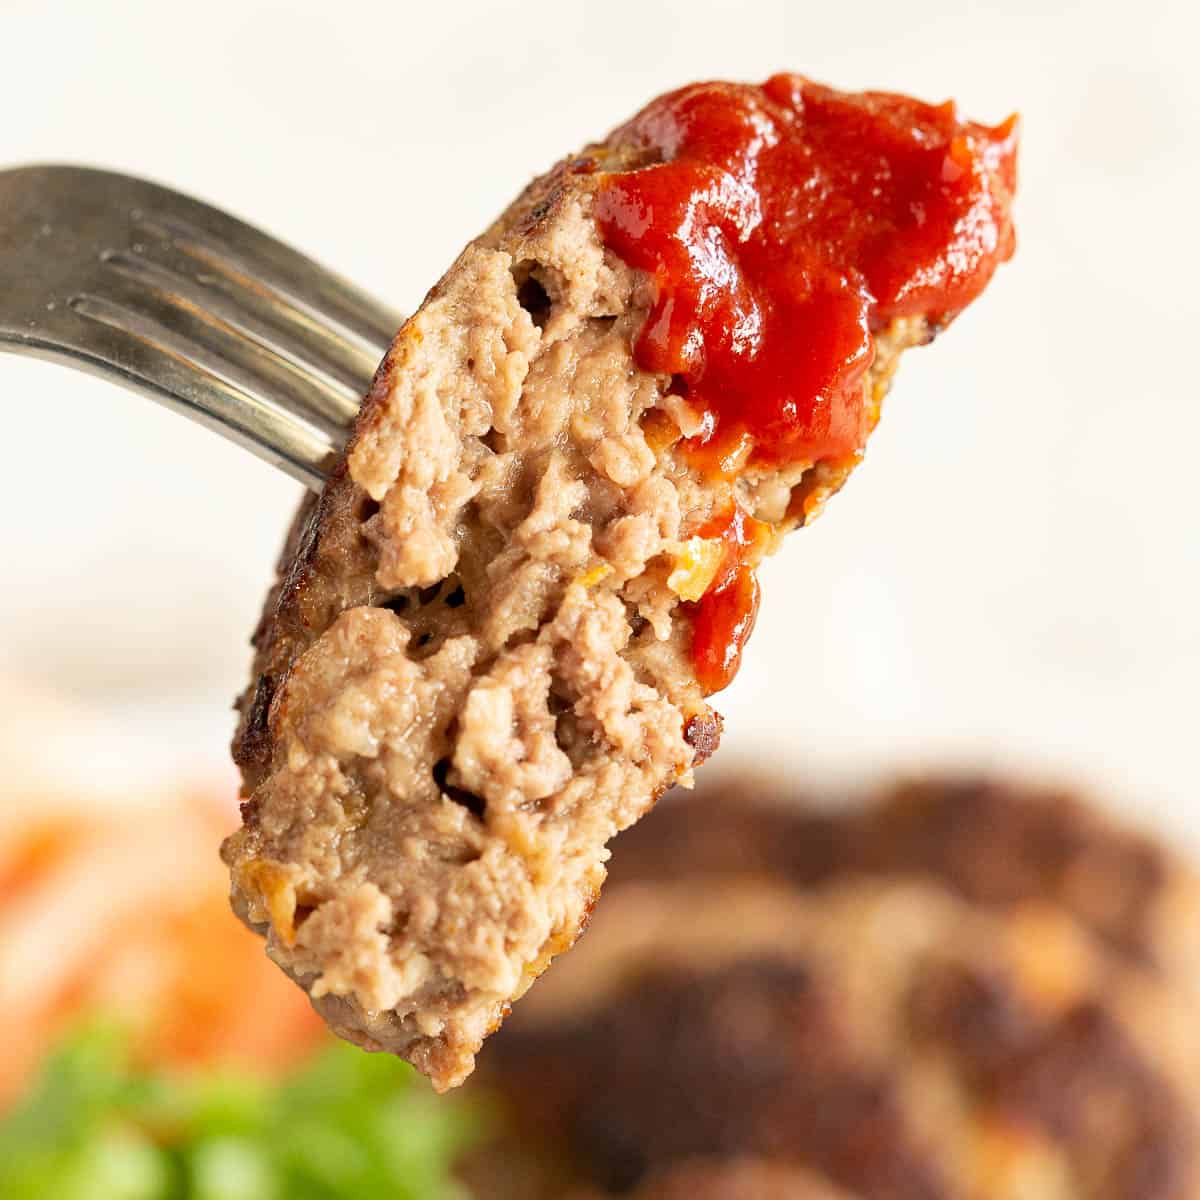 A large juice rissole dipped in tomato sauce on a fork.